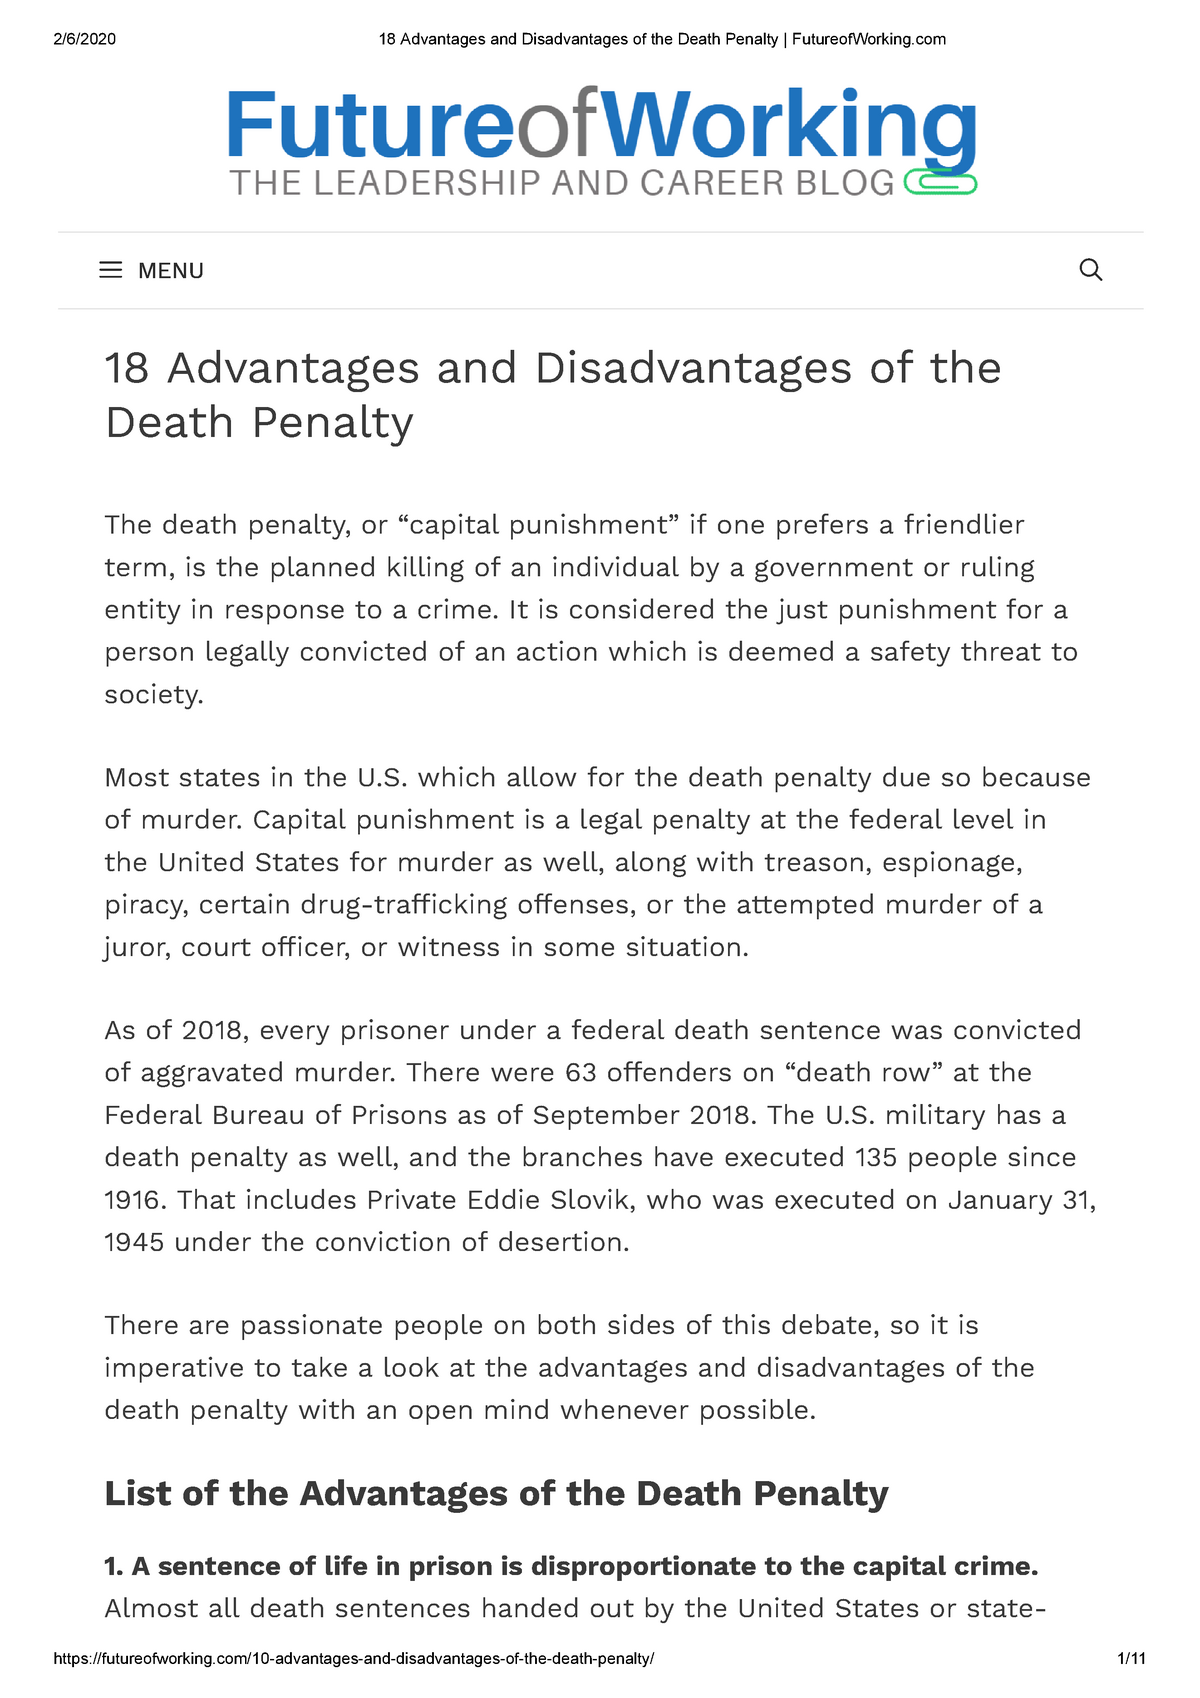 disadvantages of death penalty essay